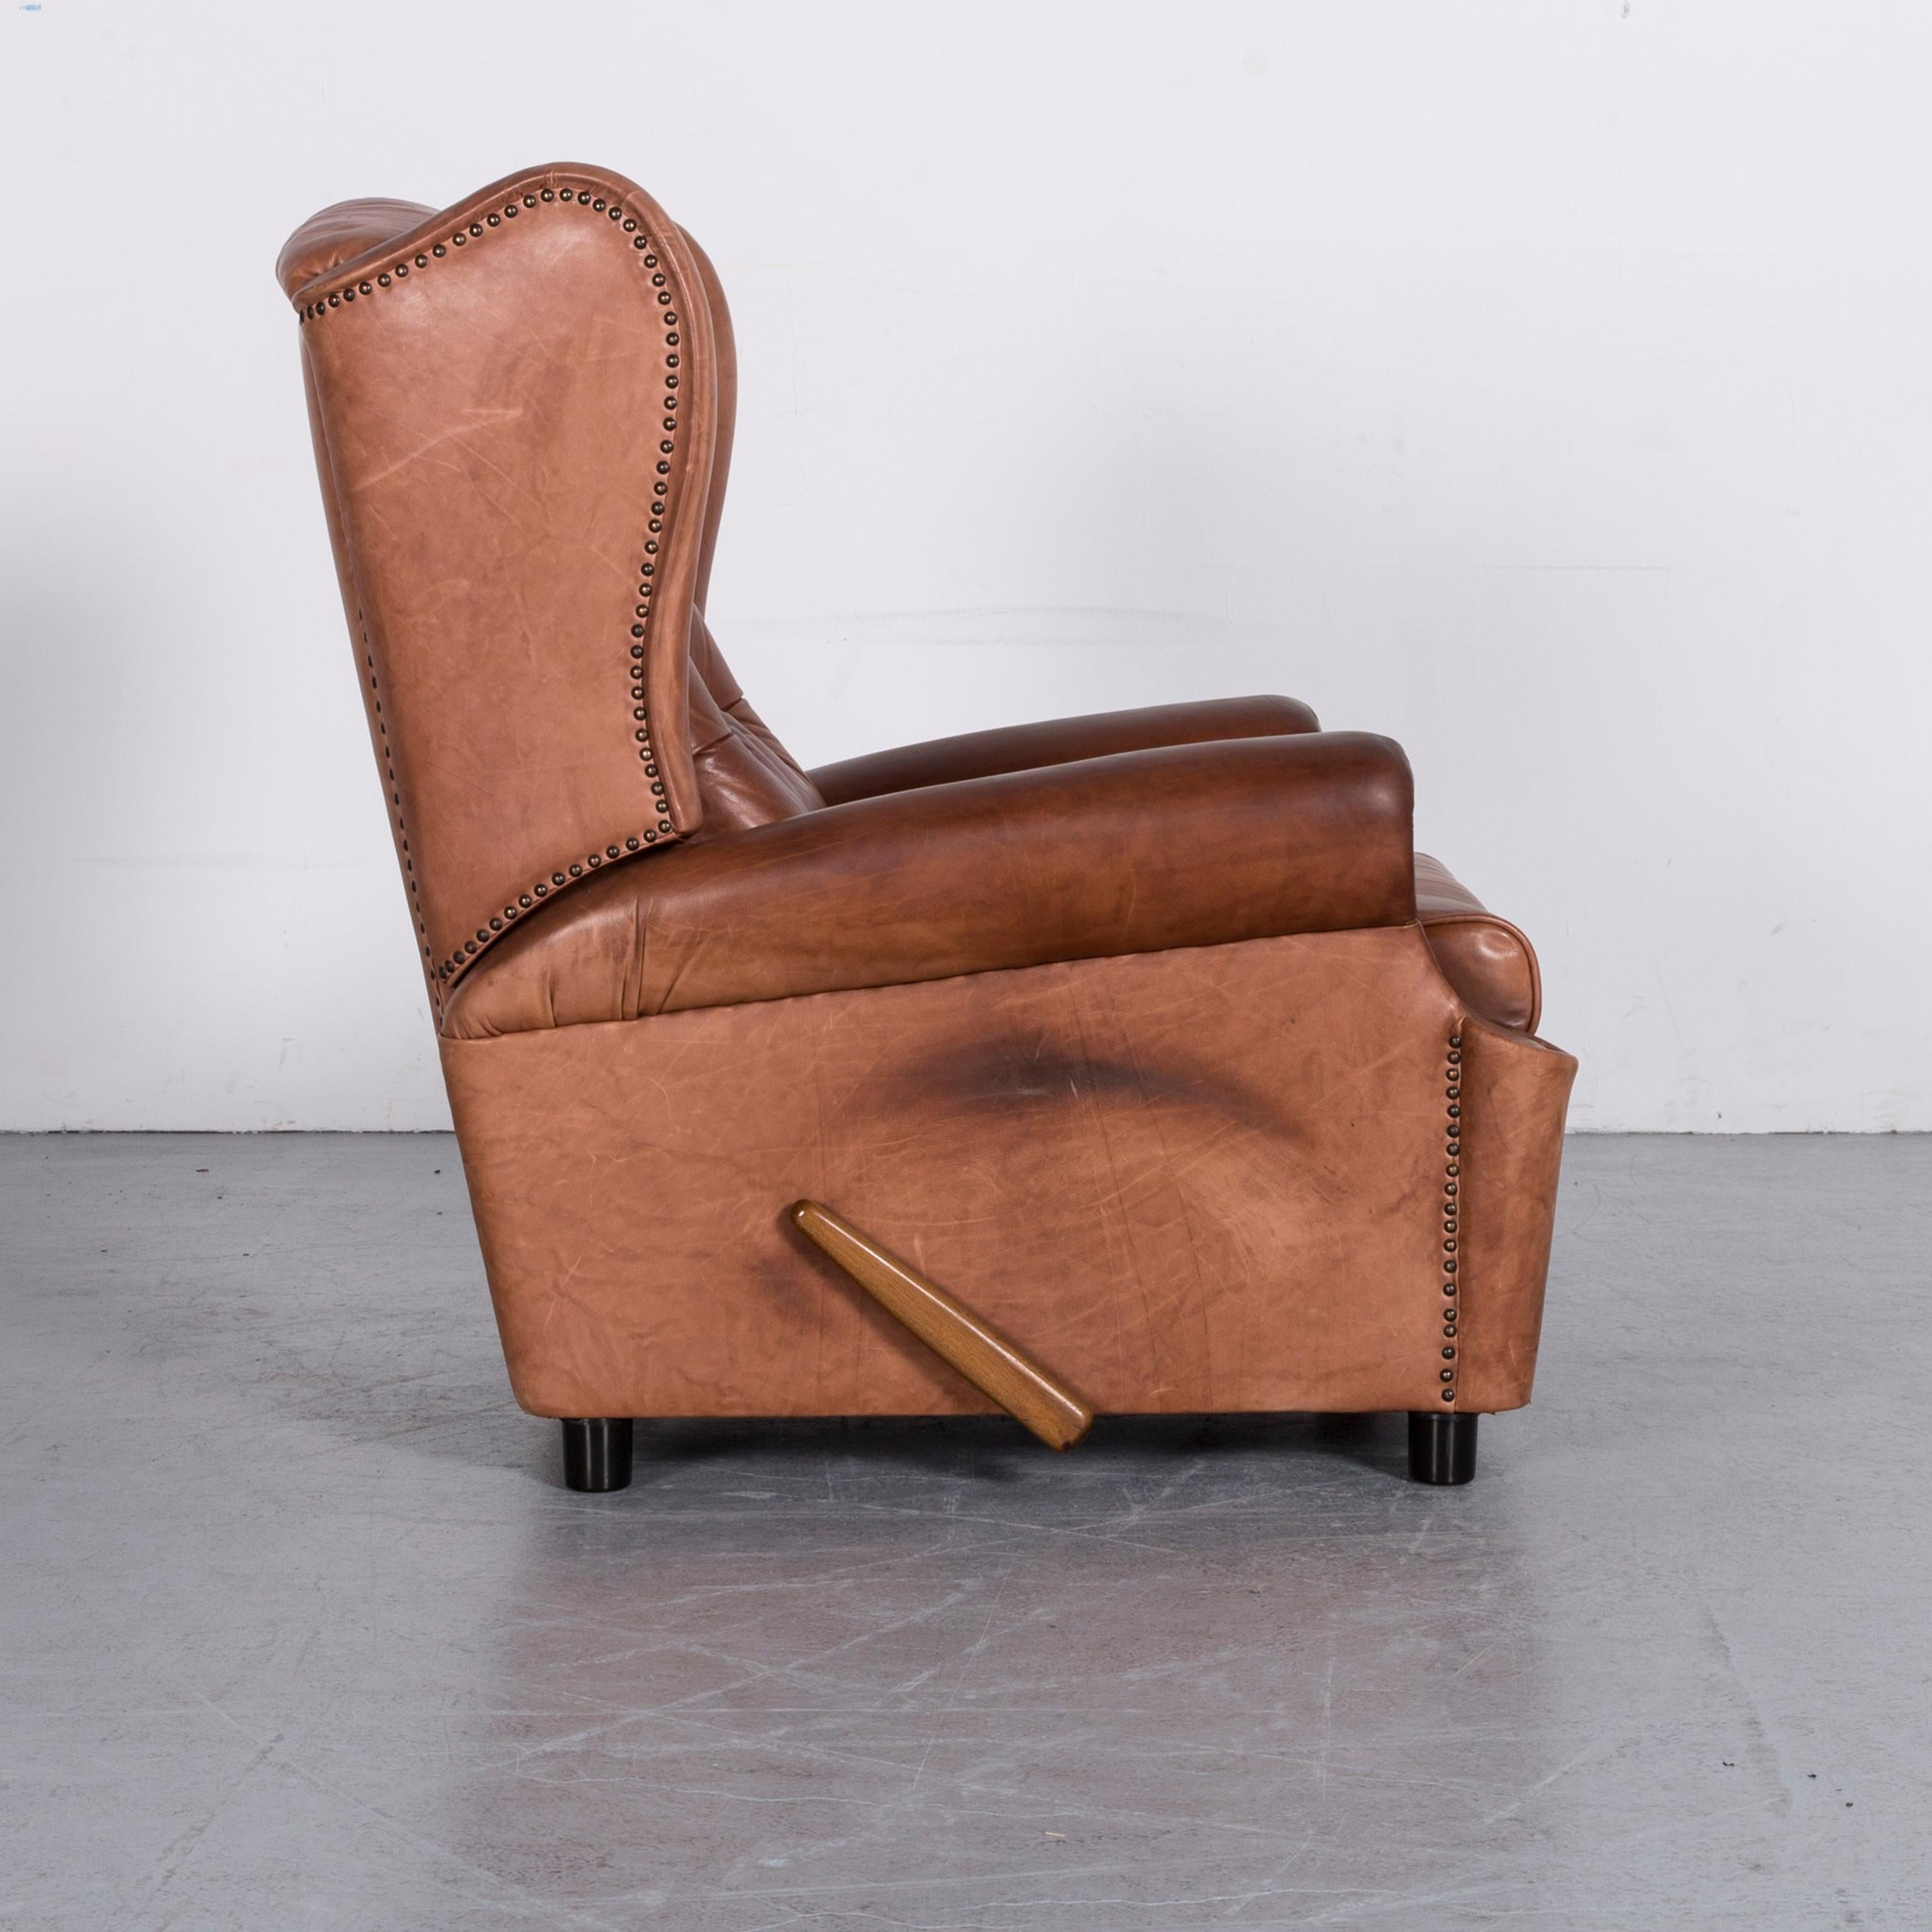 Chesterfield Leather Armchair Brown One-Seat Vintage Retro with Relax Function 7